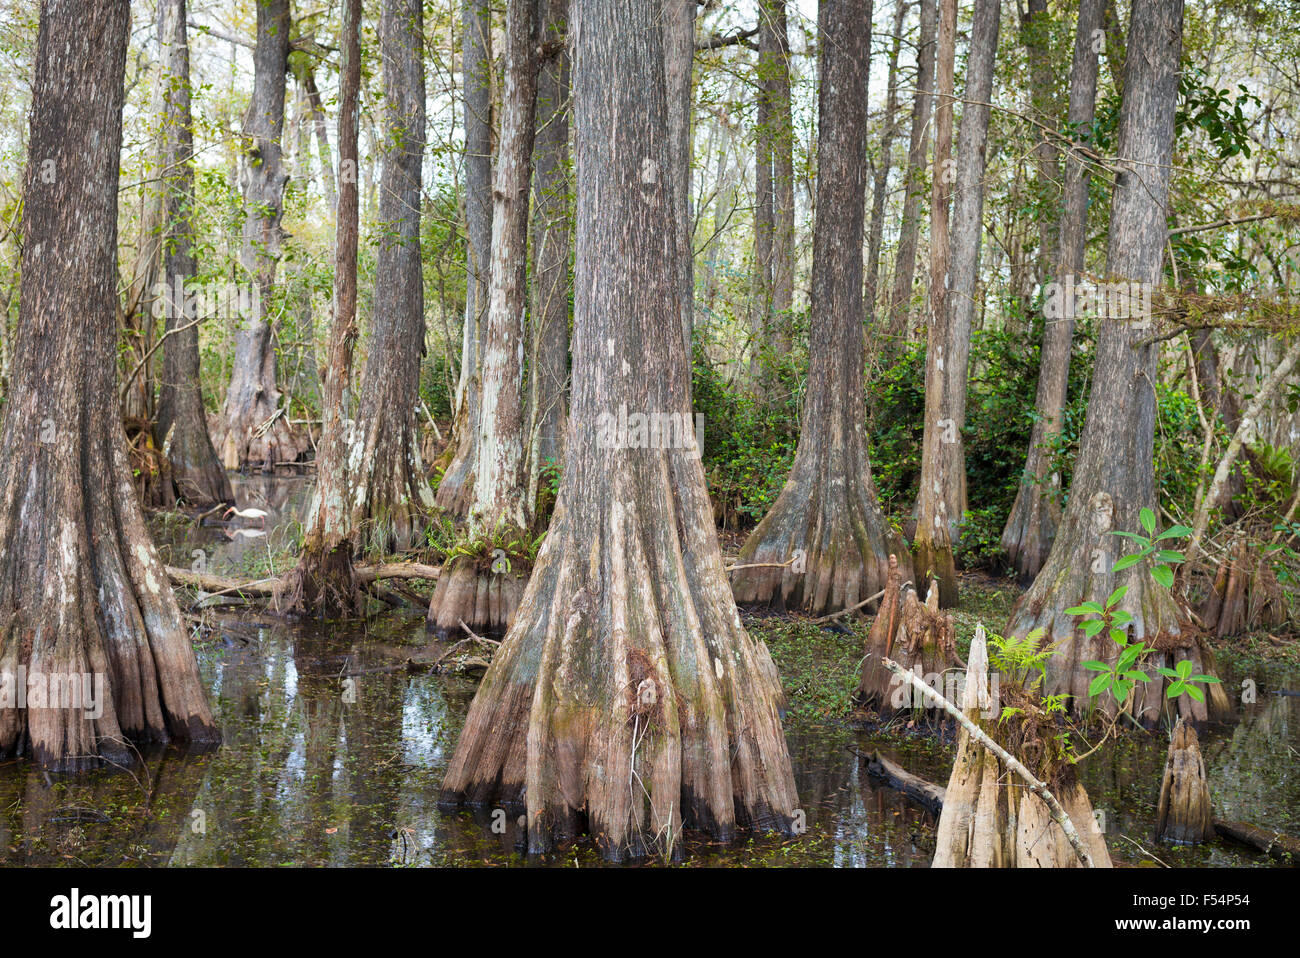 Forest of Bald cypress trees Taxodium distichum and swamp in the Florida Everglades, United States of America Stock Photo